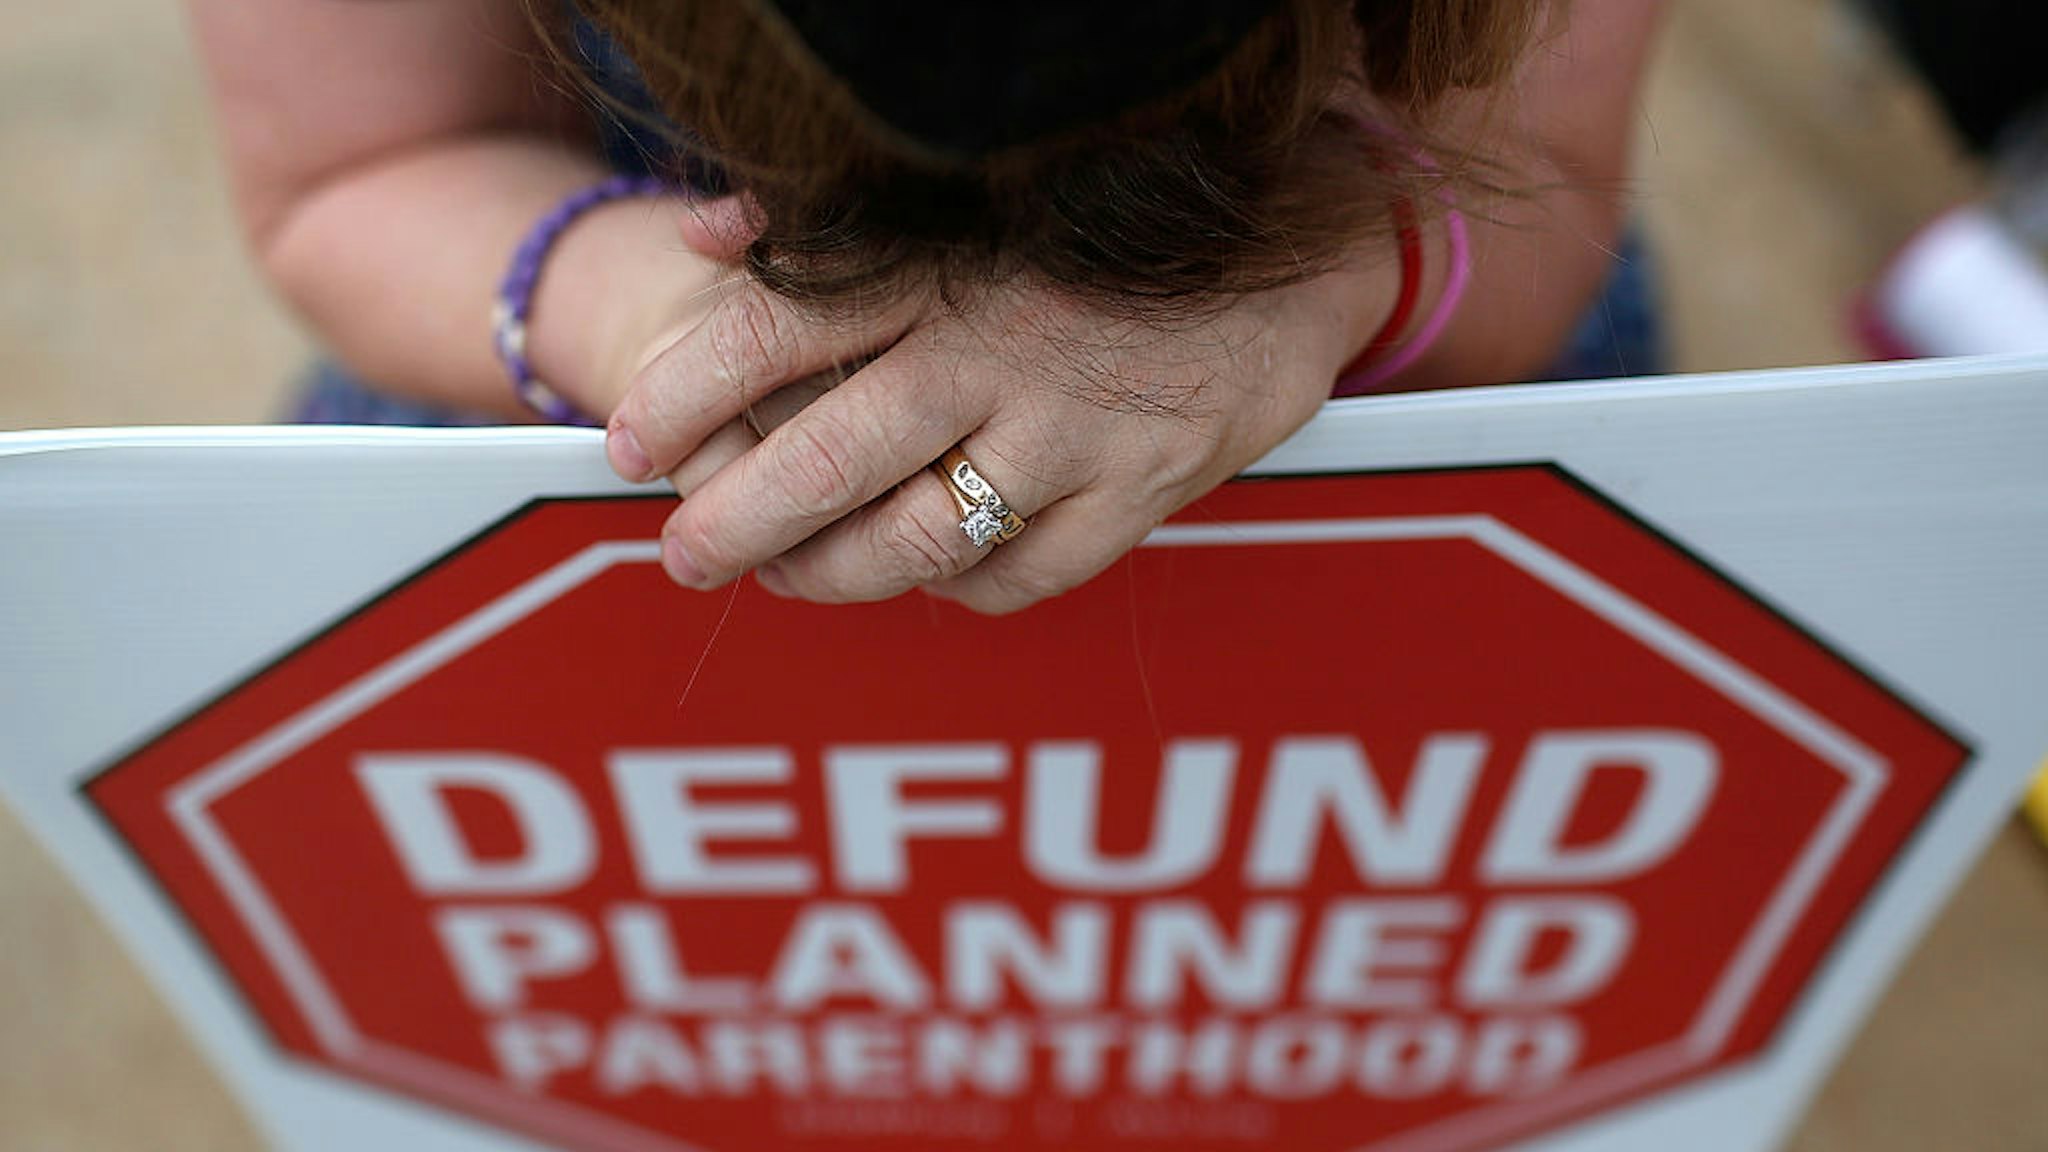 WASHINGTON, DC - SEPTEMBER 21: Right to Life advocate Linda Heilman prays during a sit-in in front of a proposed Planned Parenthood location while demonstrating the group's opposition to congressional funding of Planned Parenthood on September 21, 2015 in Washington, DC. The Right to Life groups who took part in the protest are also calling on Pope Francis to "address the pro-life issue and the defunding of Planned Parenthood" when he addresses Congress on September 24. (Photo by Win McNamee/Getty Images)